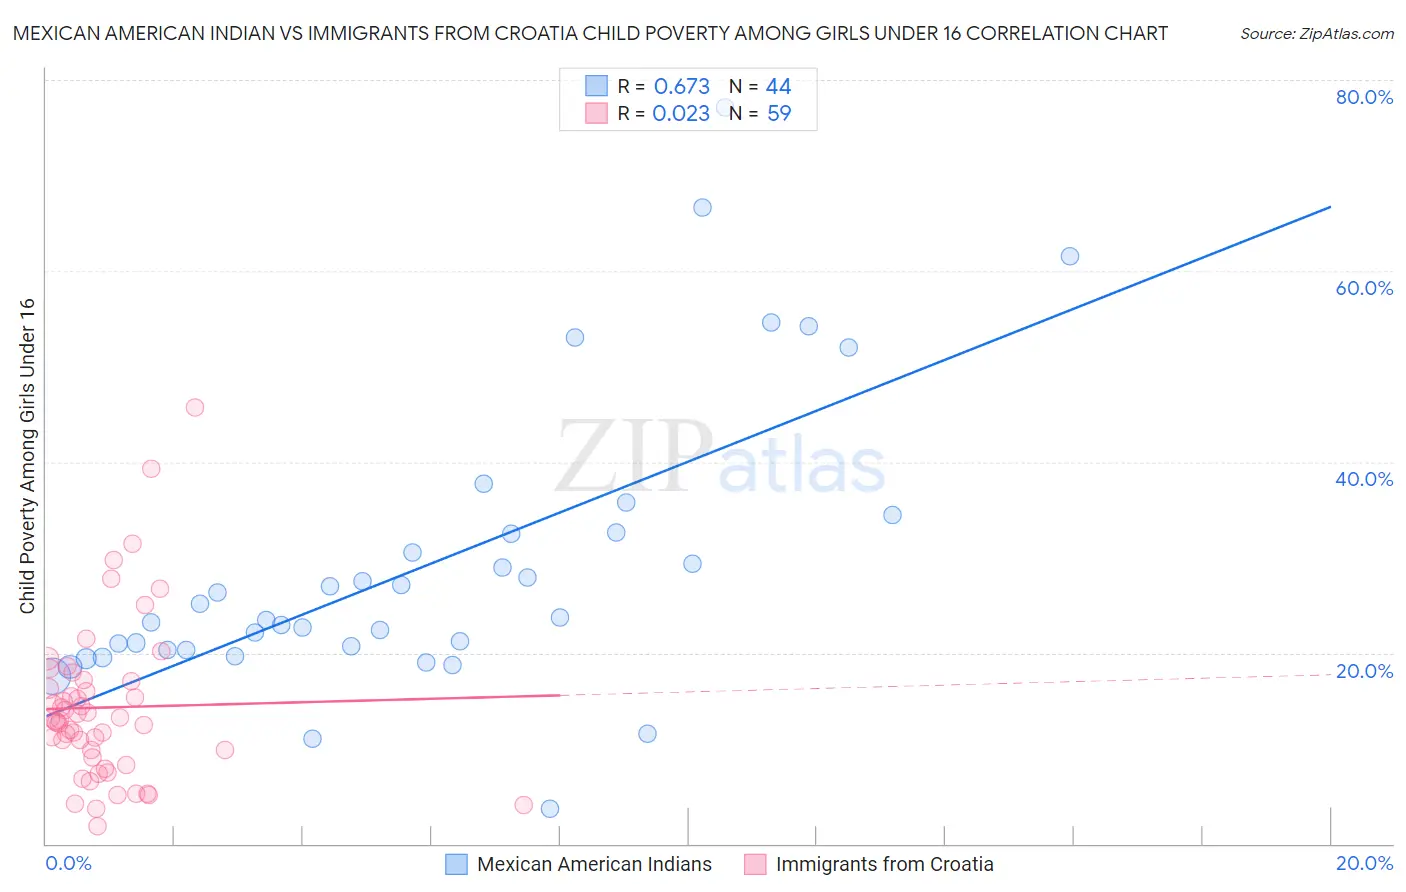 Mexican American Indian vs Immigrants from Croatia Child Poverty Among Girls Under 16